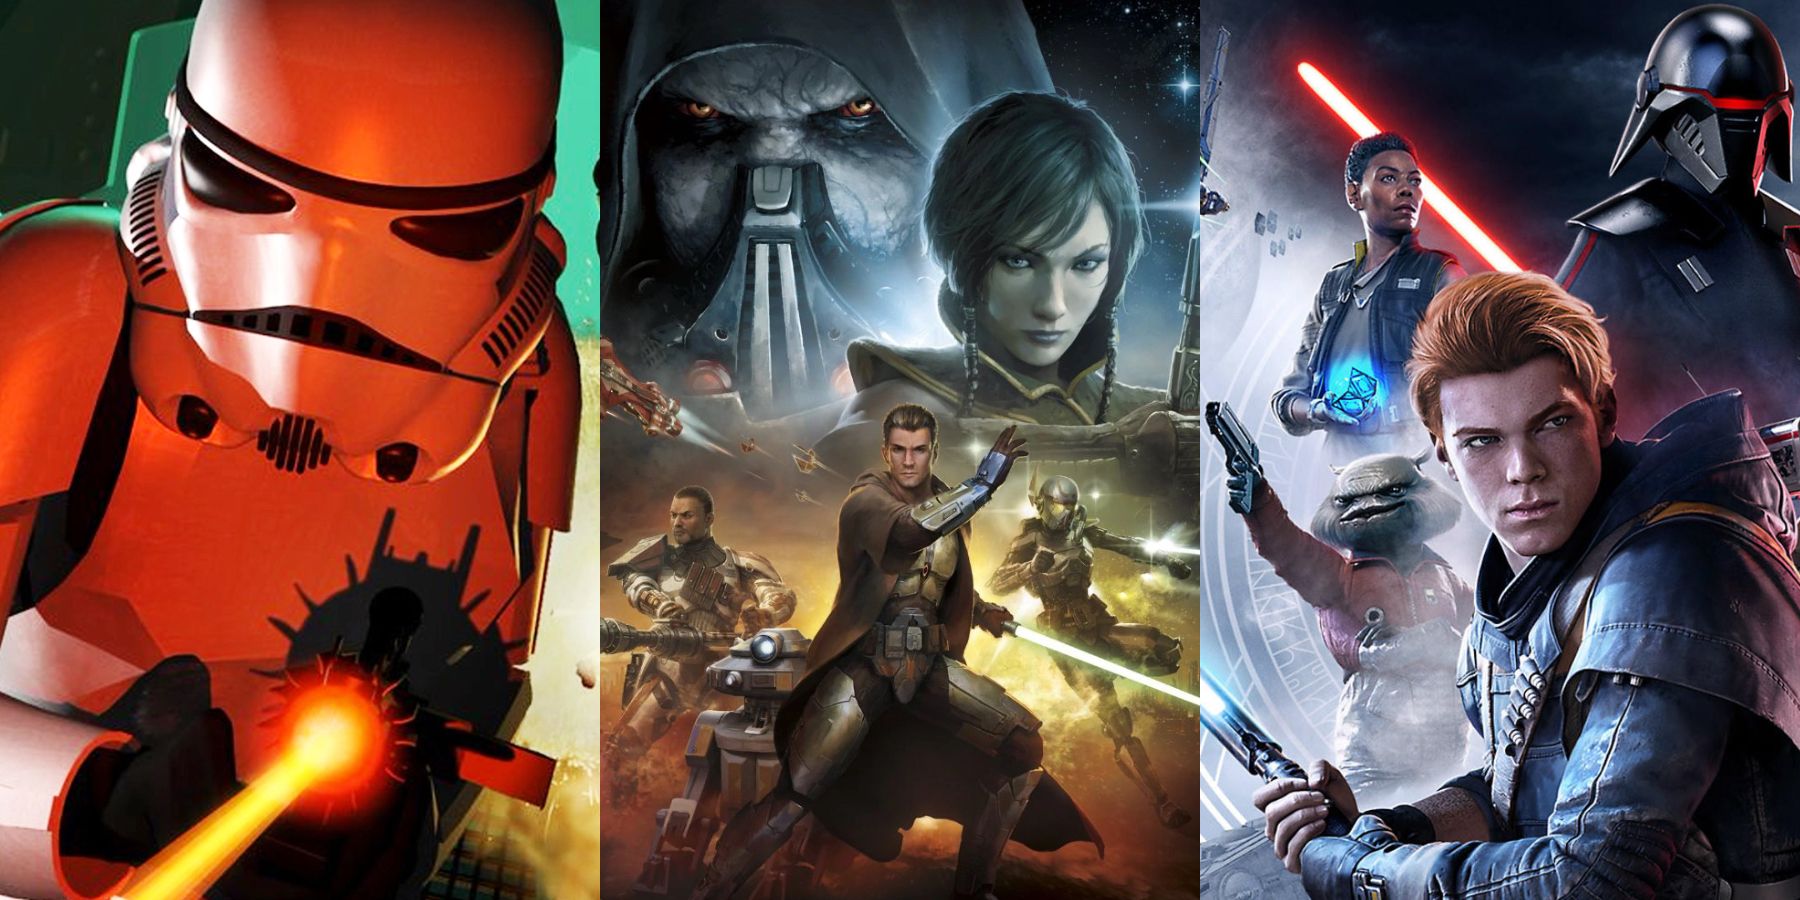 Star Wars has released hundreds of video games, but only a handful are essential.